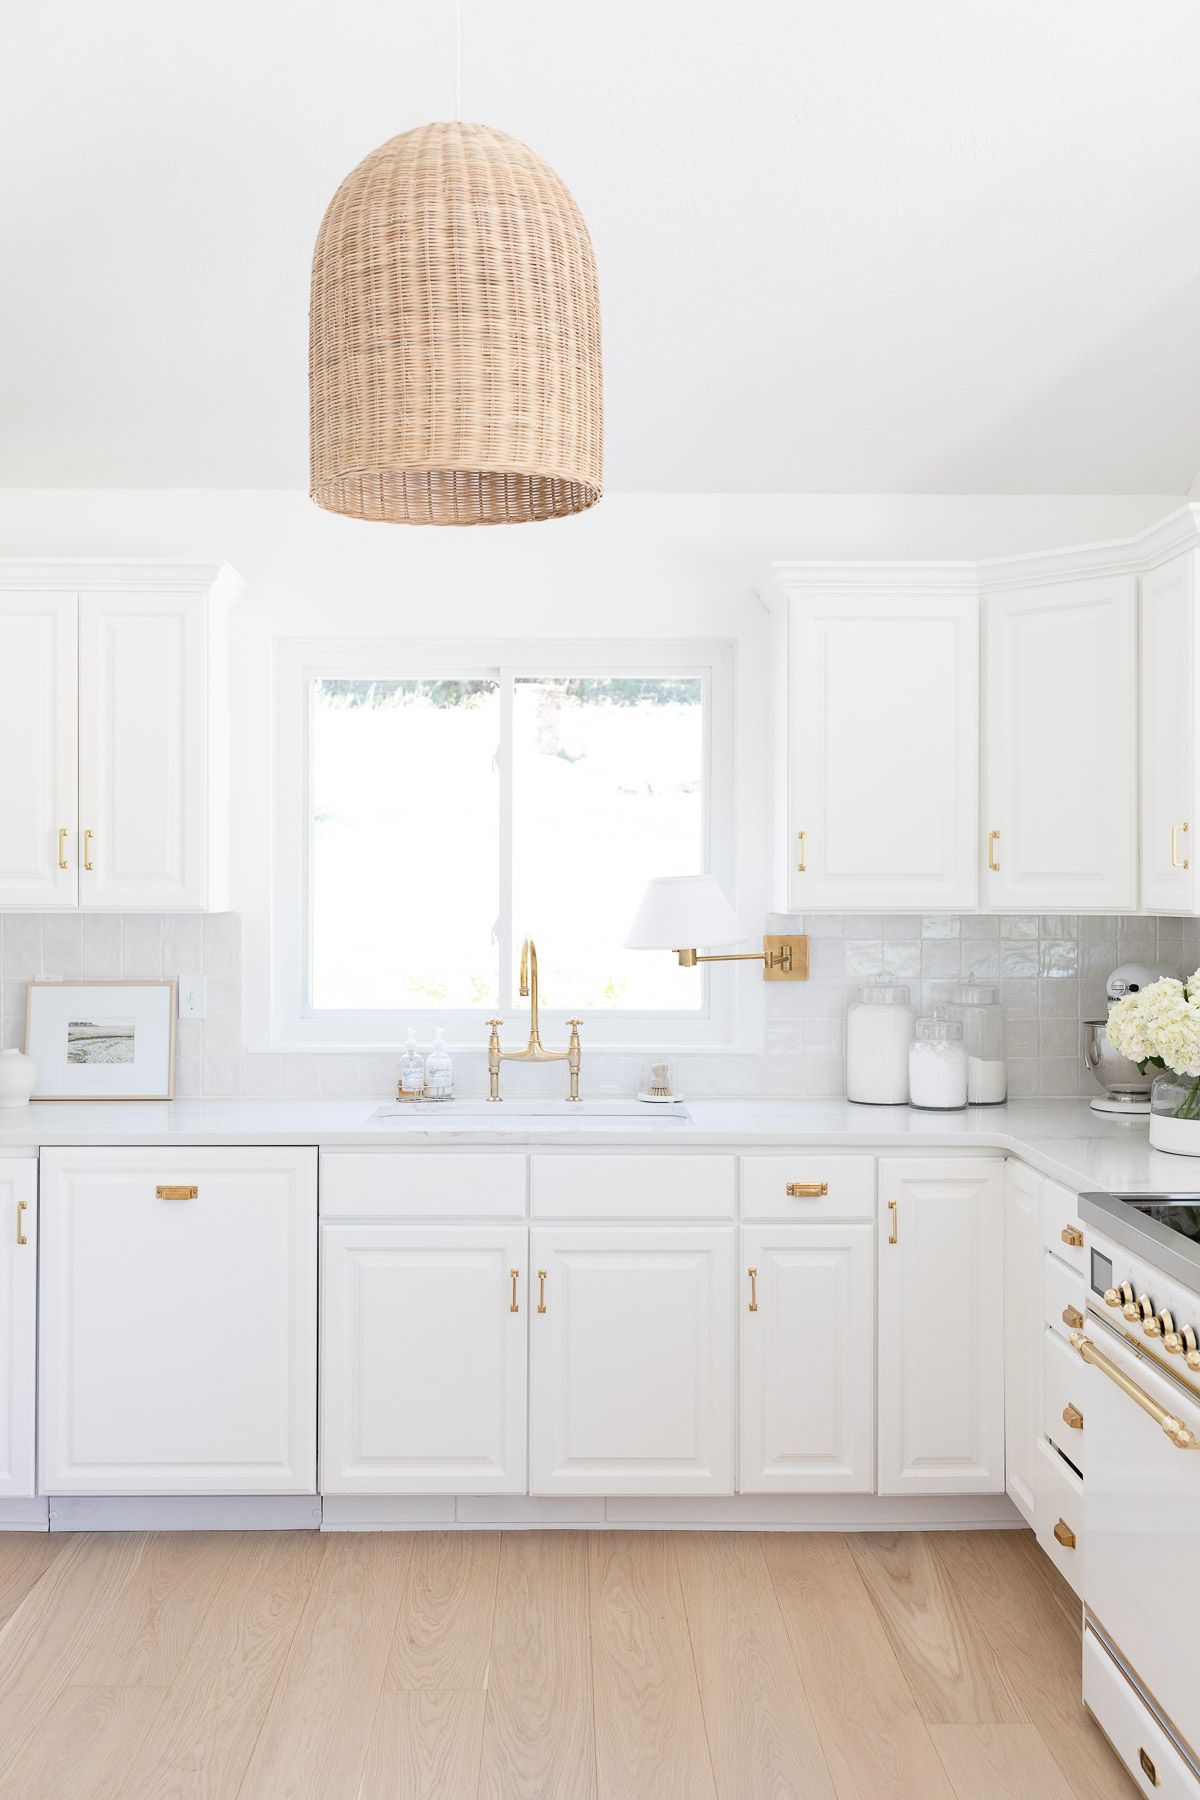 A white kitchen with white cabinets, white walls, and white ceiling paint.